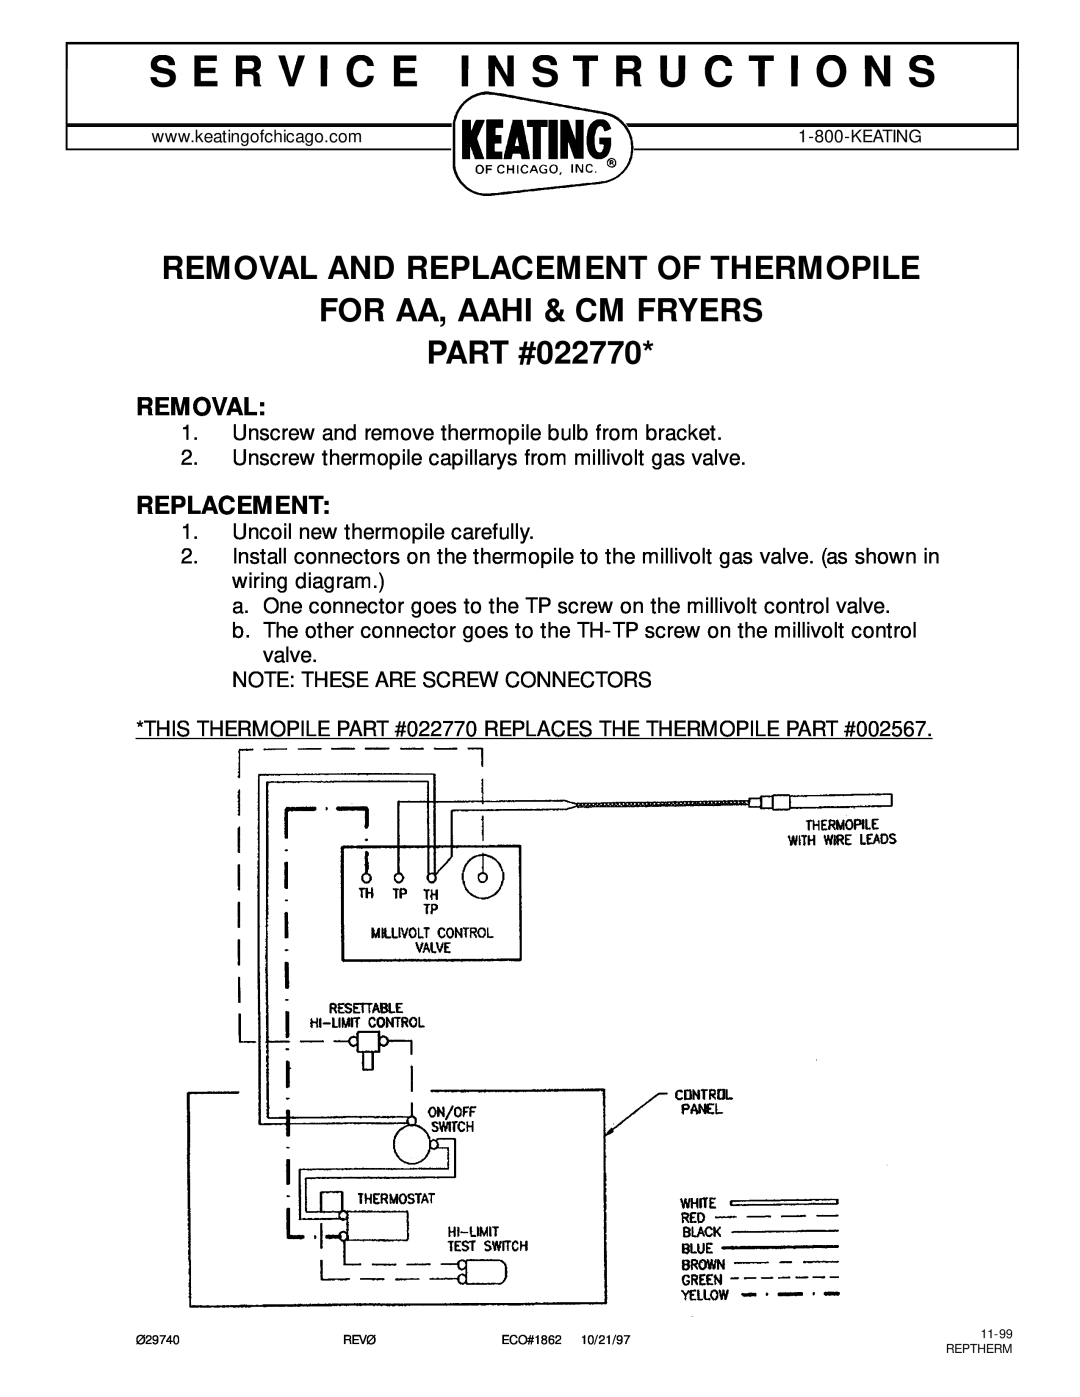 Keating Of Chicago manual Removal And Replacement Of Thermopile, FOR AA, AAHI & CM FRYERS PART #022770 